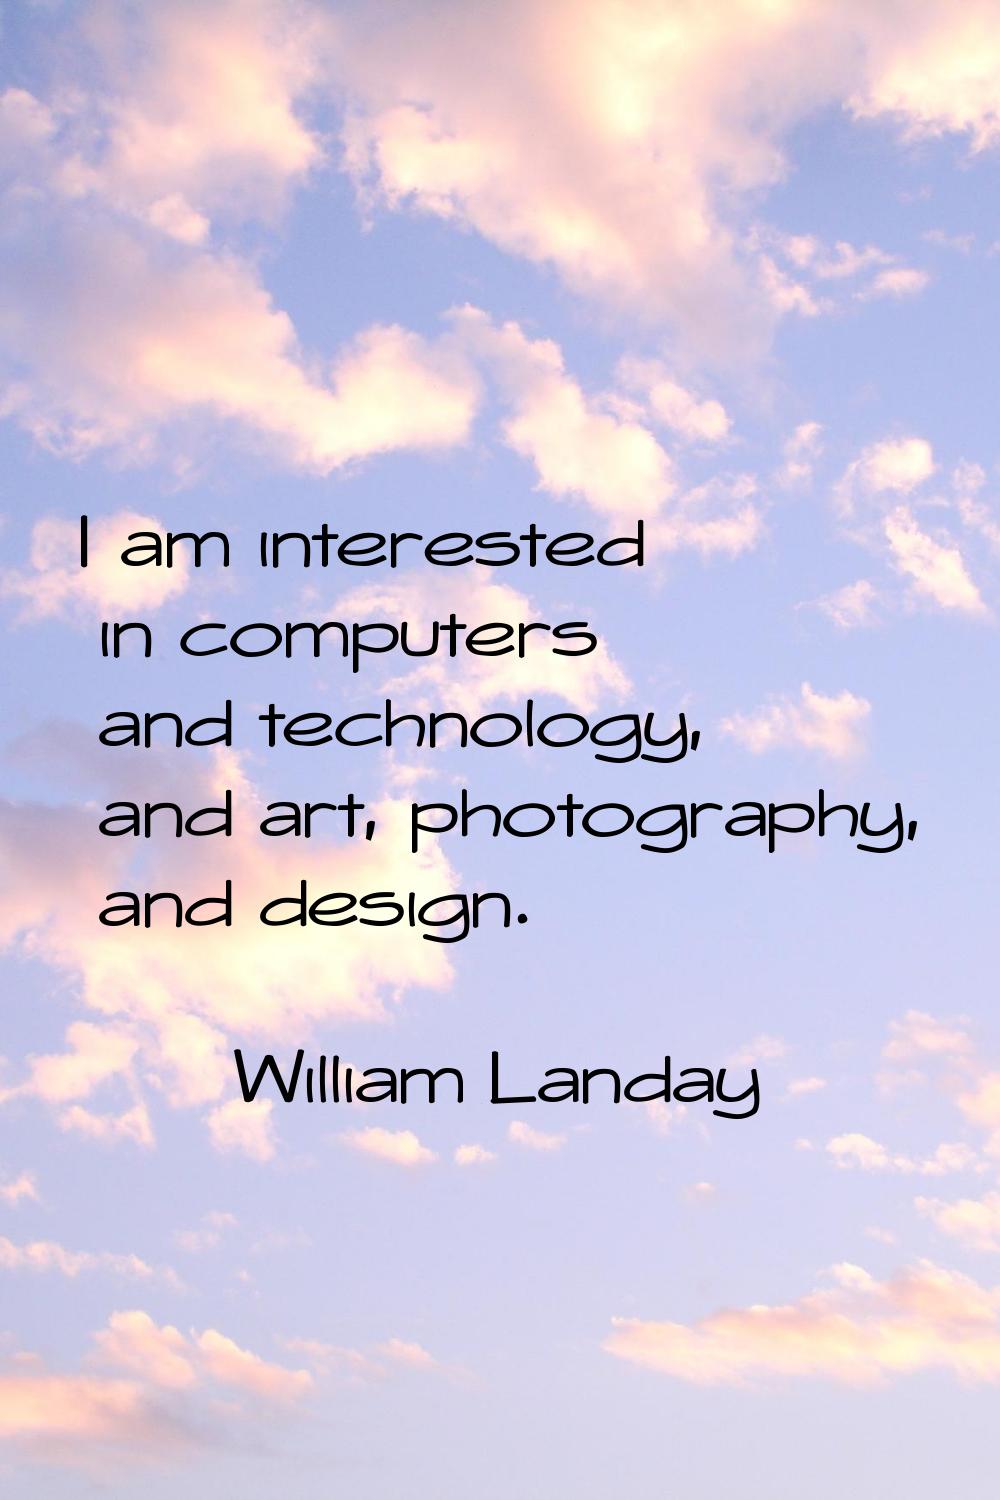 I am interested in computers and technology, and art, photography, and design.